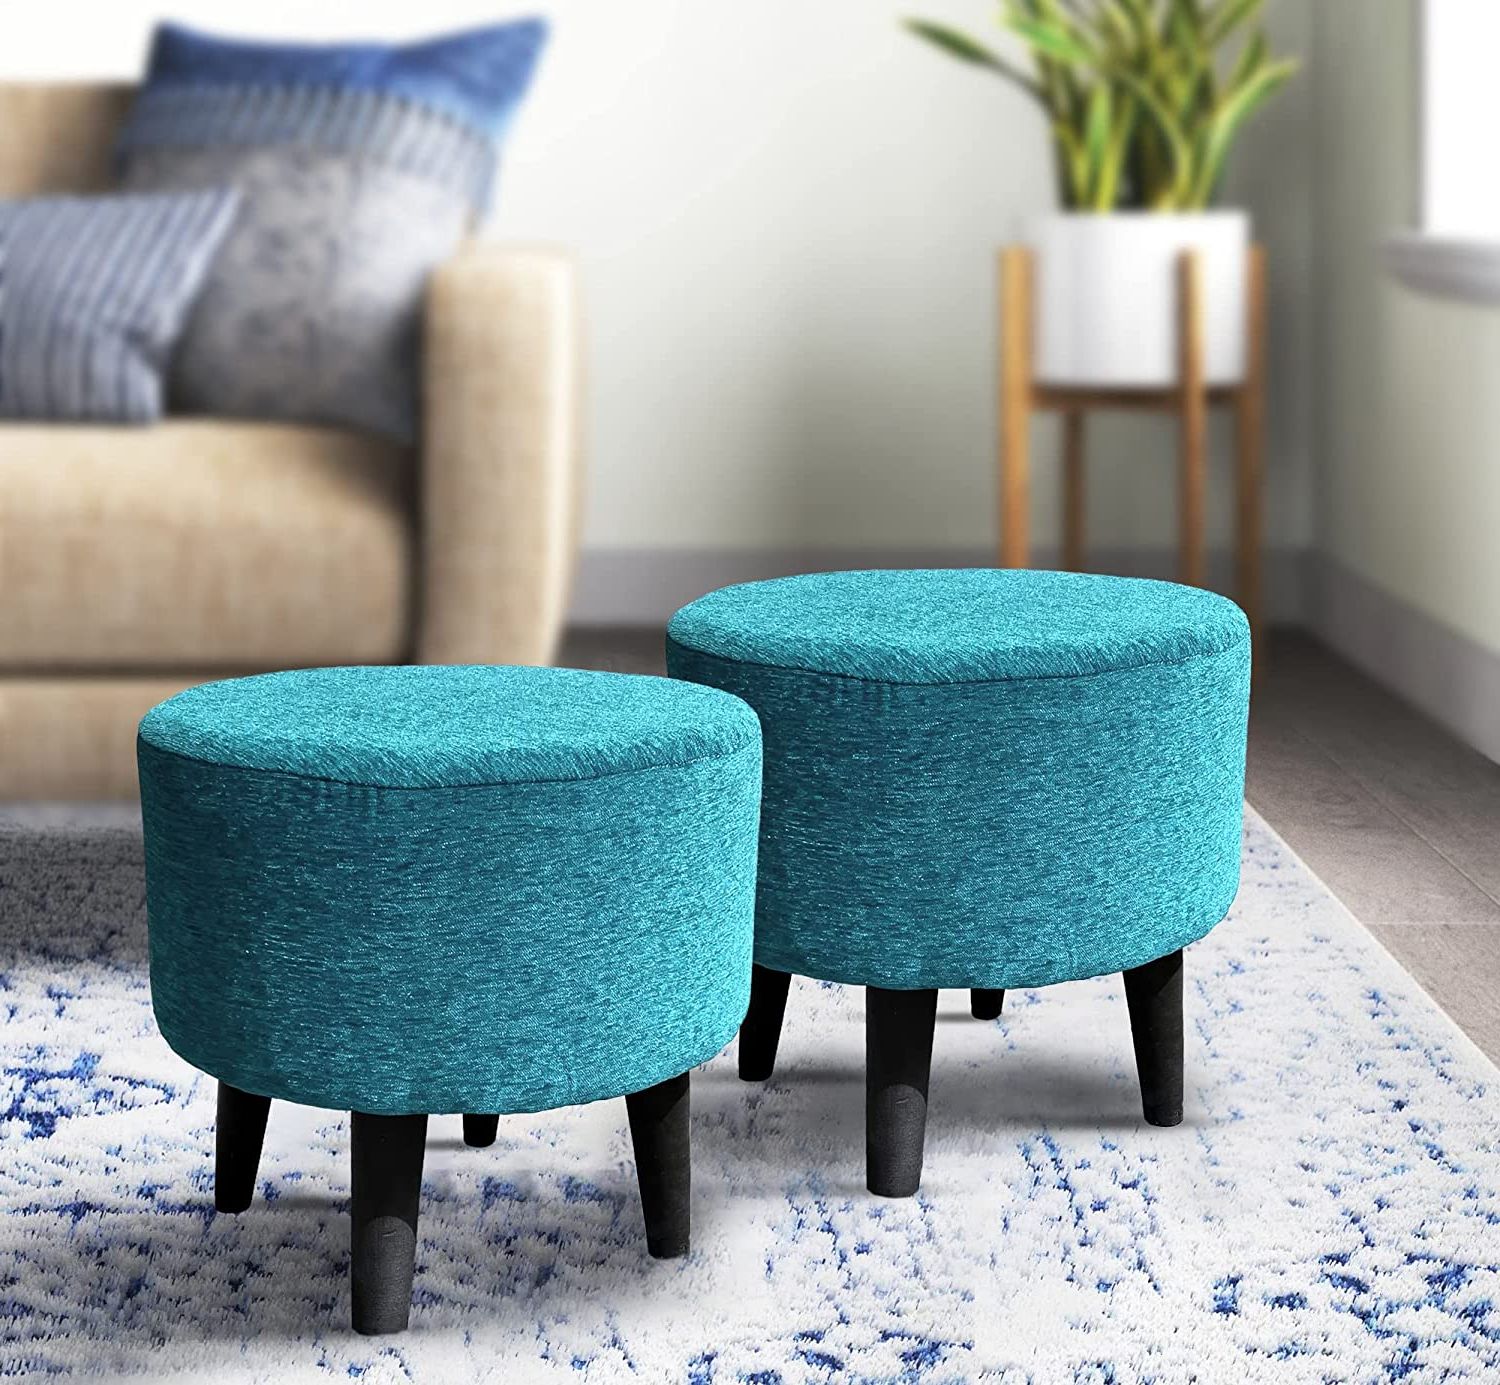 16 Inch Ottomans Inside Newest Homeaccex Ottoman Puffy Stool For Living Room Set Of 2 Pouffes Sitting  Furniture Wooden Upholstered Foam Cushioned Puffies Footrest Footstool Home  Multifunctional Fancy Stool (16" Inch Height Aqua) : Amazon (View 10 of 10)